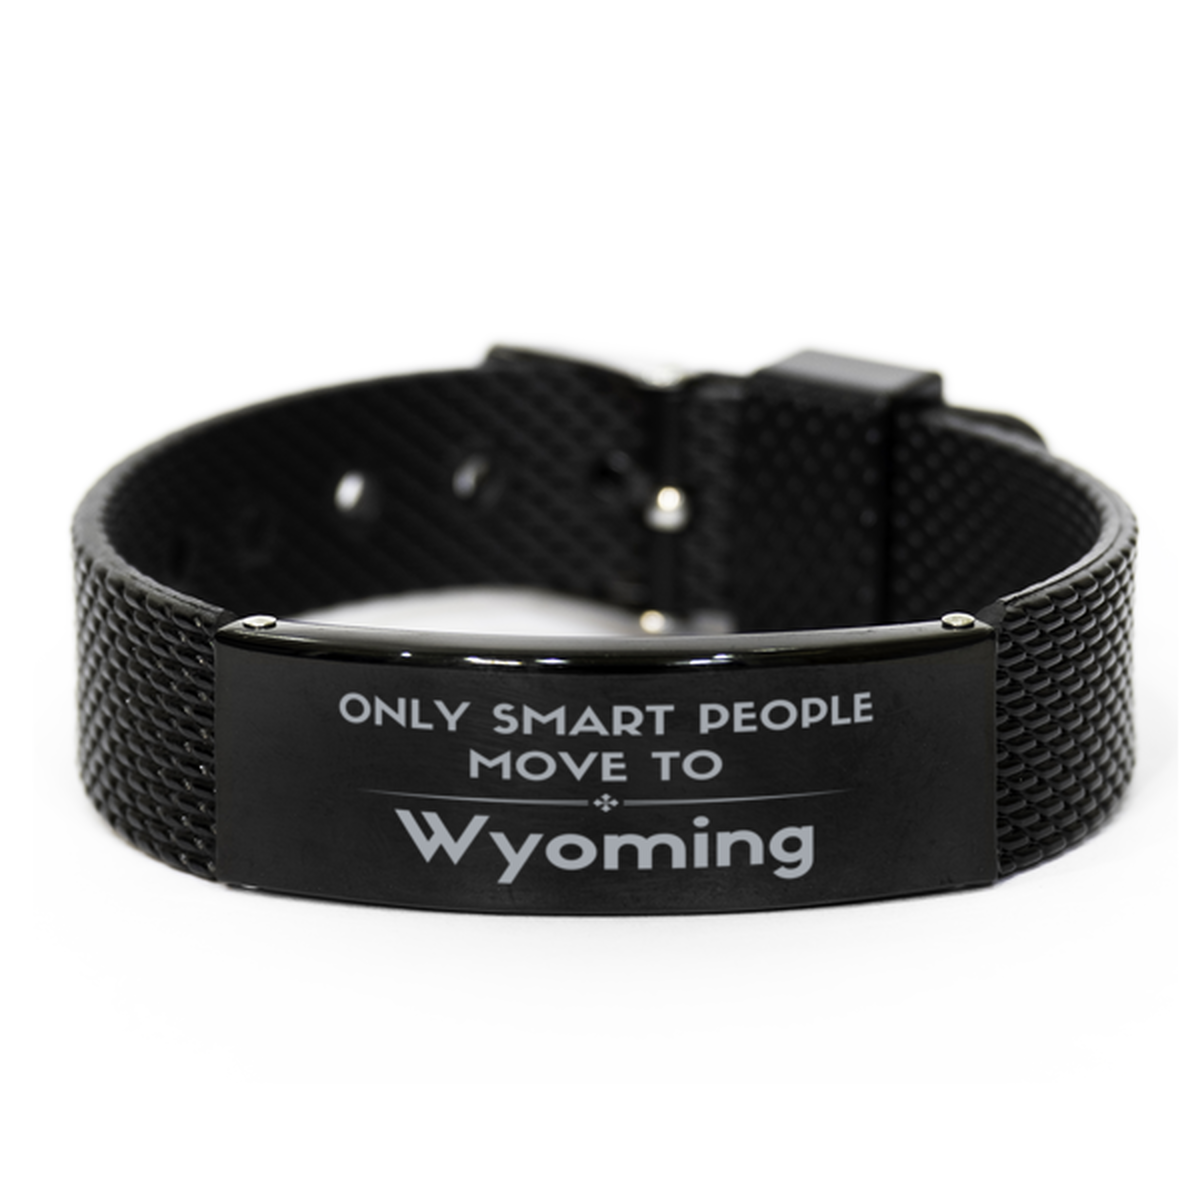 Only smart people move to Wyoming Black Shark Mesh Bracelet, Gag Gifts For Wyoming, Move to Wyoming Gifts for Friends Coworker Funny Saying Quote